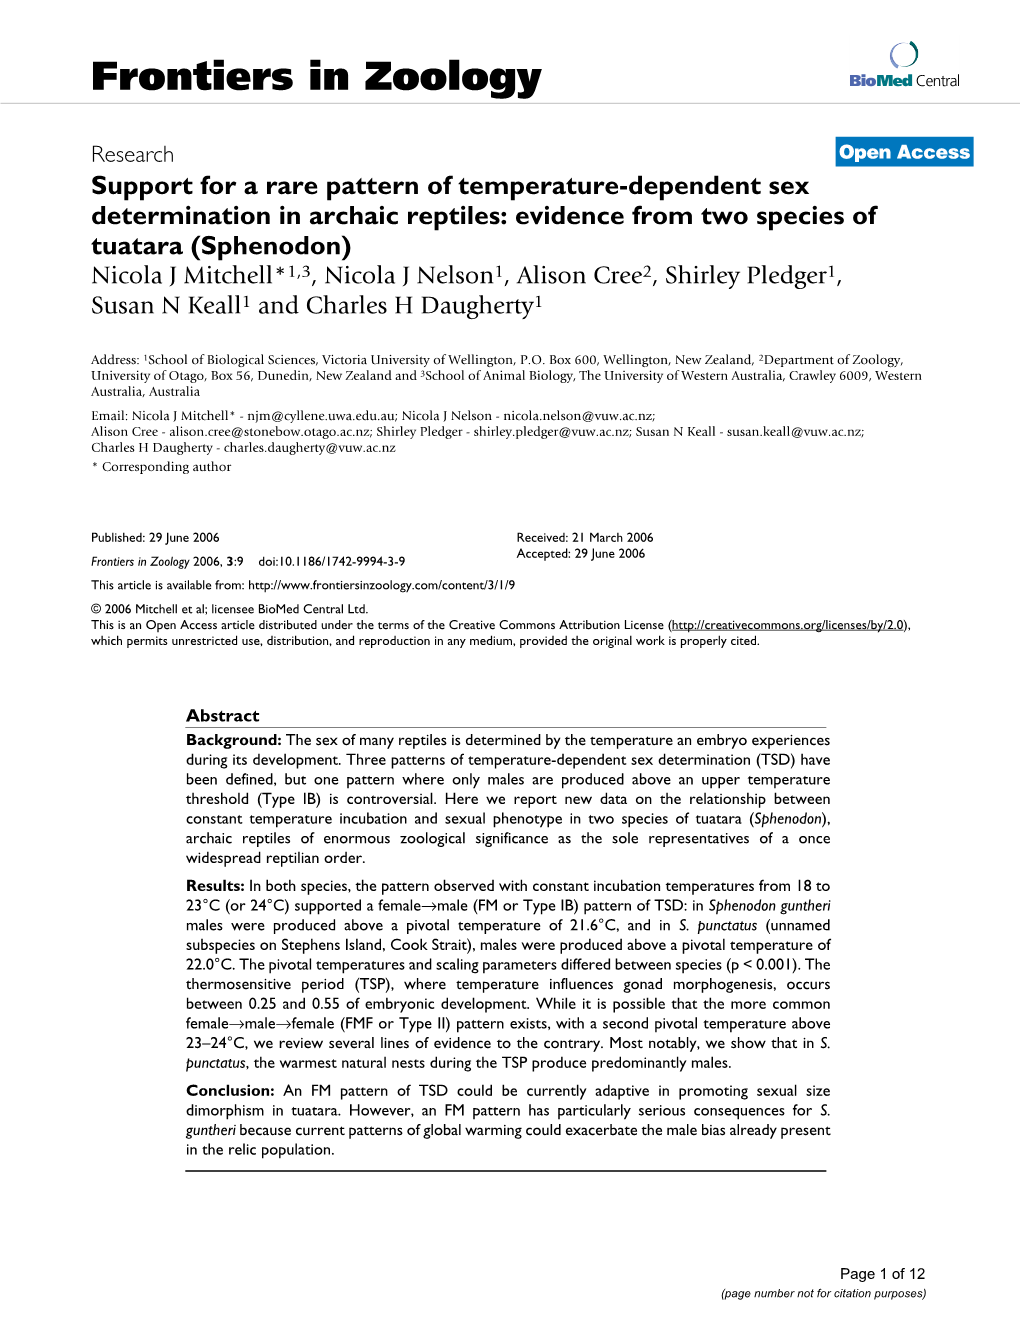 Support for a Rare Pattern of Temperature-Dependent Sex